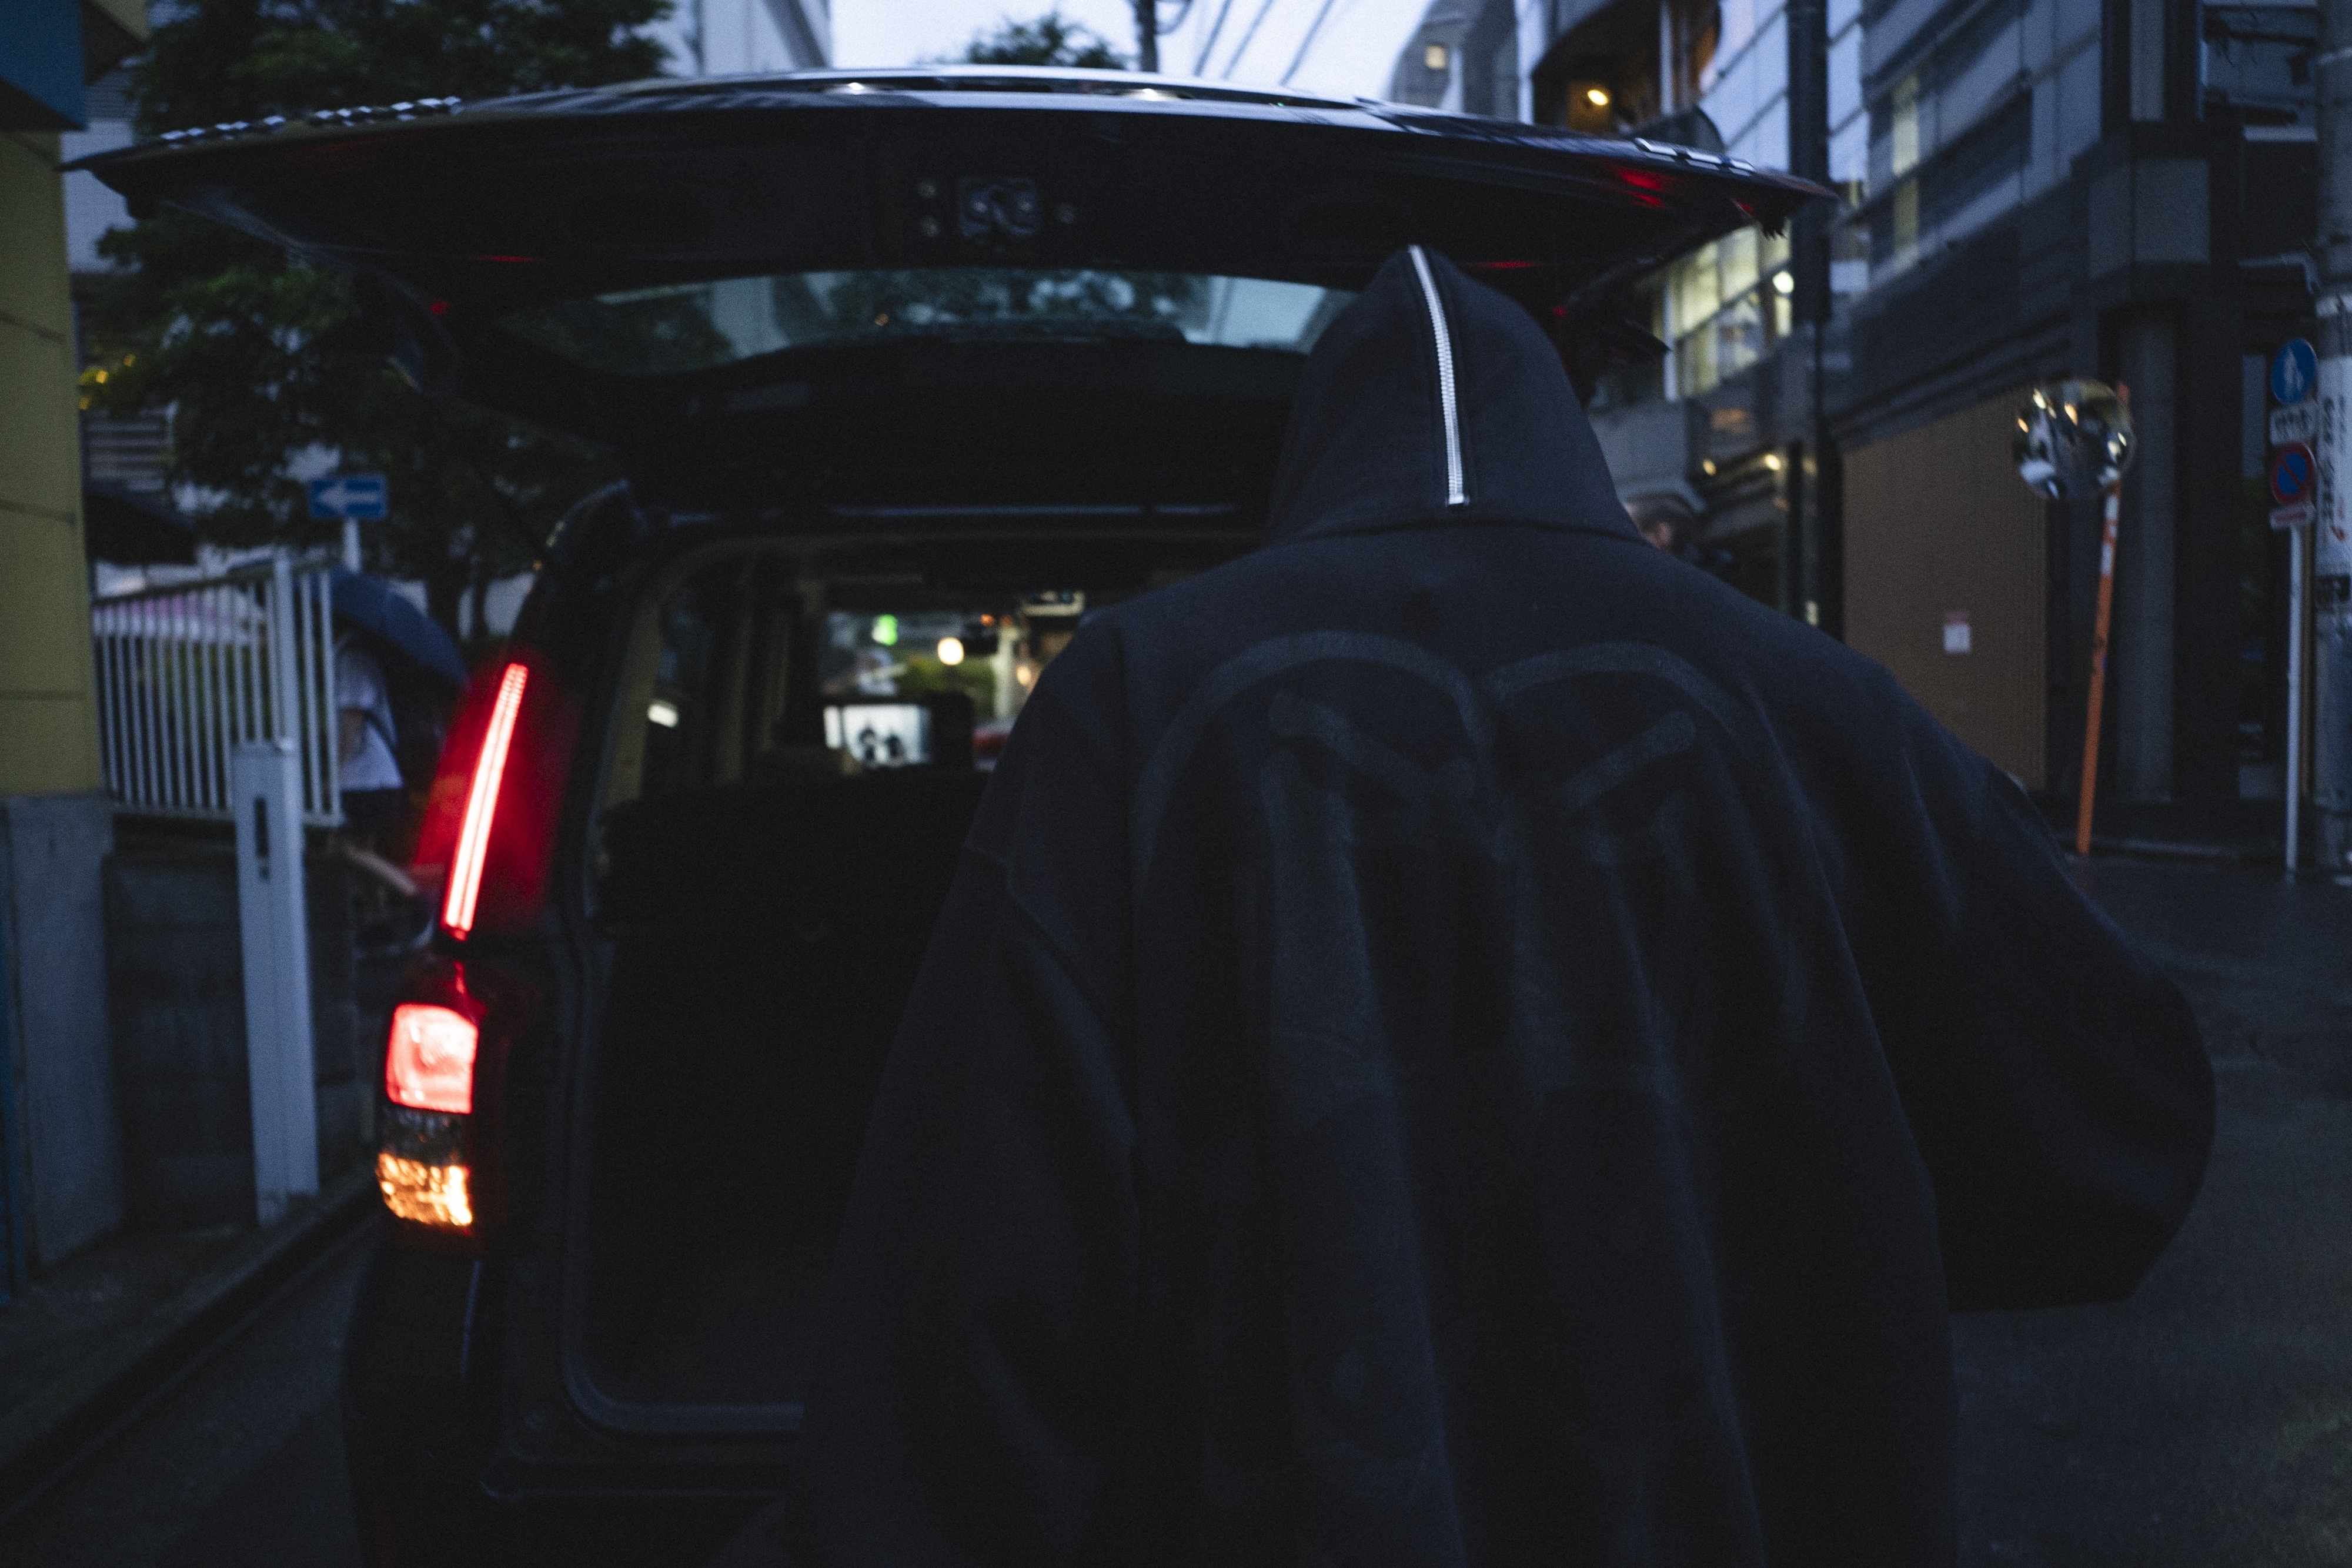 Person in a hooded jacket seen from the back standing near an open car trunk in a dimly lit urban area